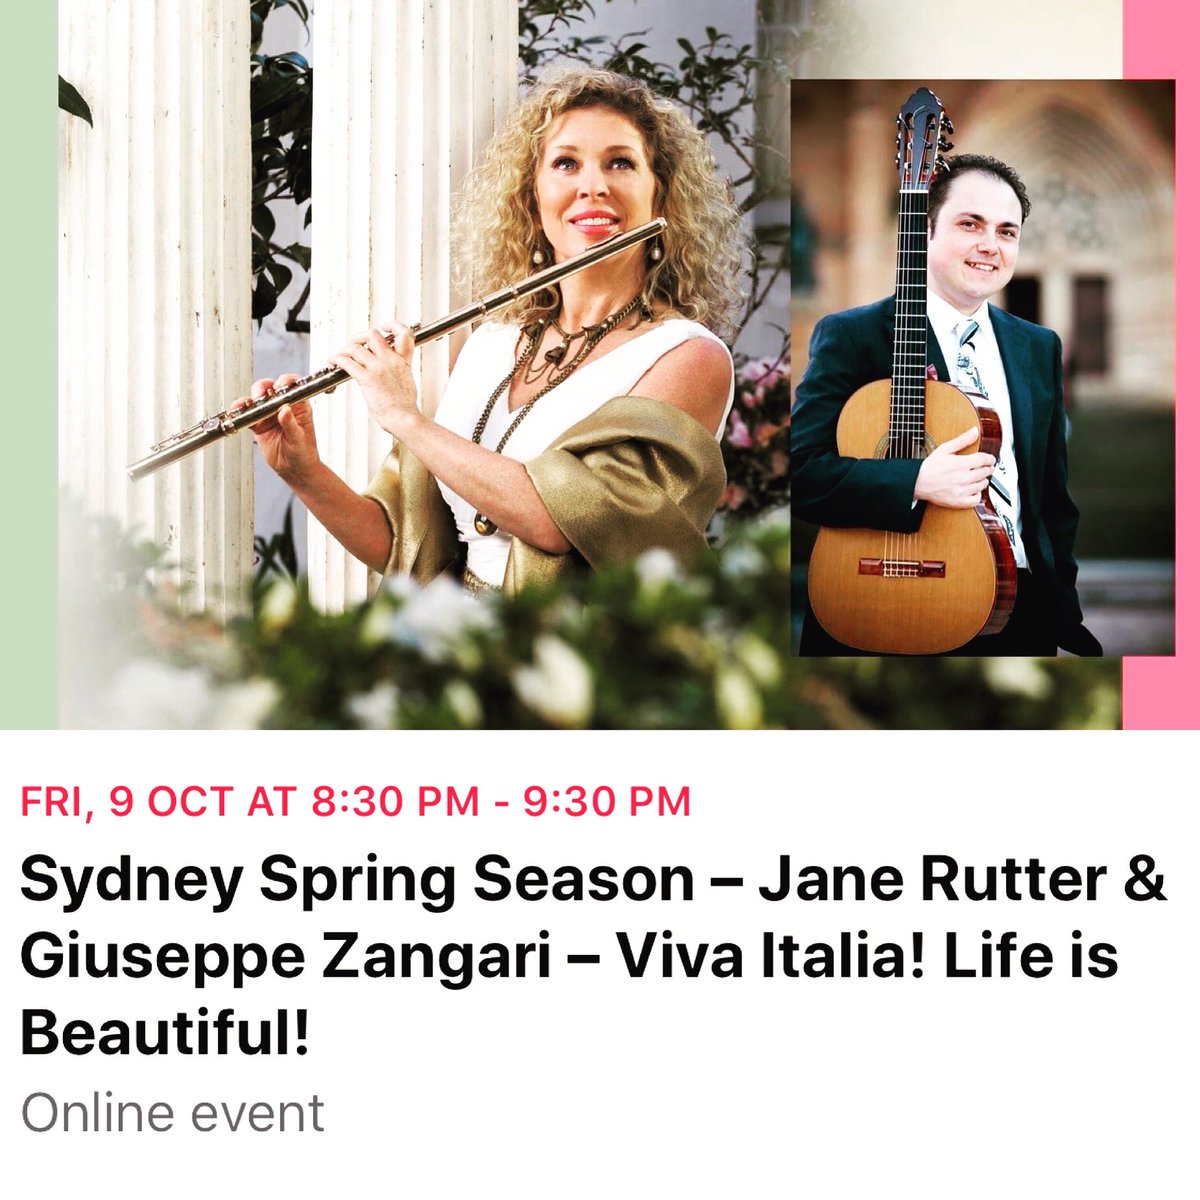 VIVA ITALIA! LIFE IS BEAUTIFUL! Join us 8:30 pm AEDT Fri Oct 9 for some 🎶 fun in the comfort of your own home with FEEL-GOOD Italian Music!
@JaneRutter & Giuseppe Zangari 
#onlineconcert #fluteandguitar #italianmusic @NAS_AU #melbournedigitalconcerthall
melbournedigitalconcerthall.com/sydney-spring-…